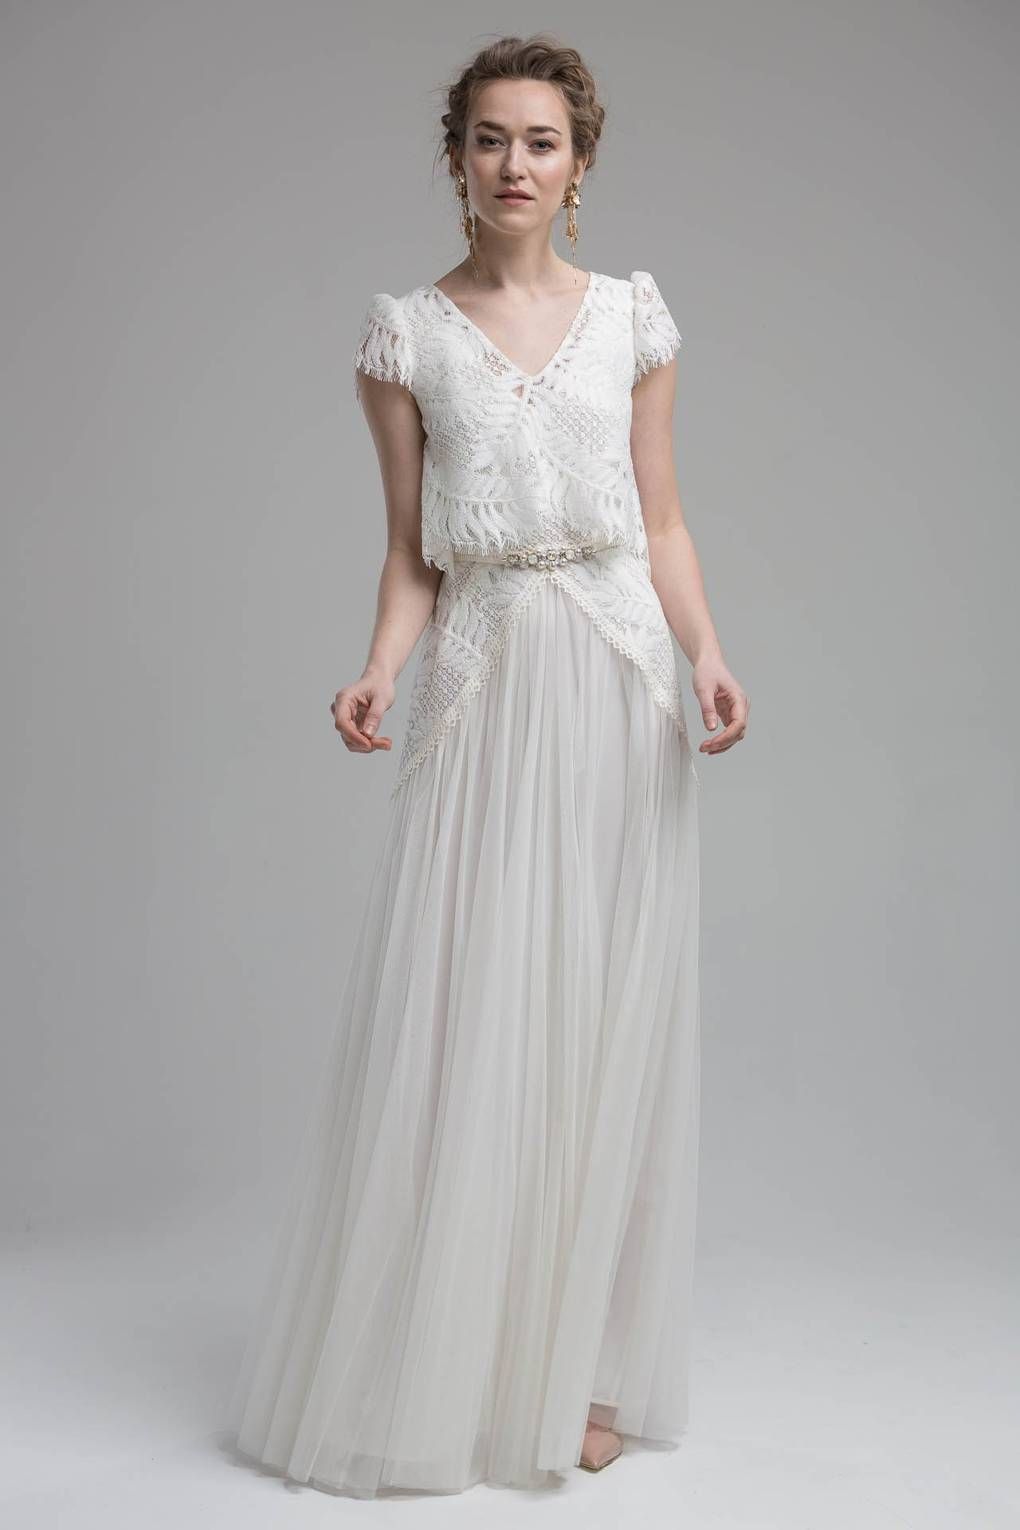 Where to Buy Vintage Wedding Dresses Online and In